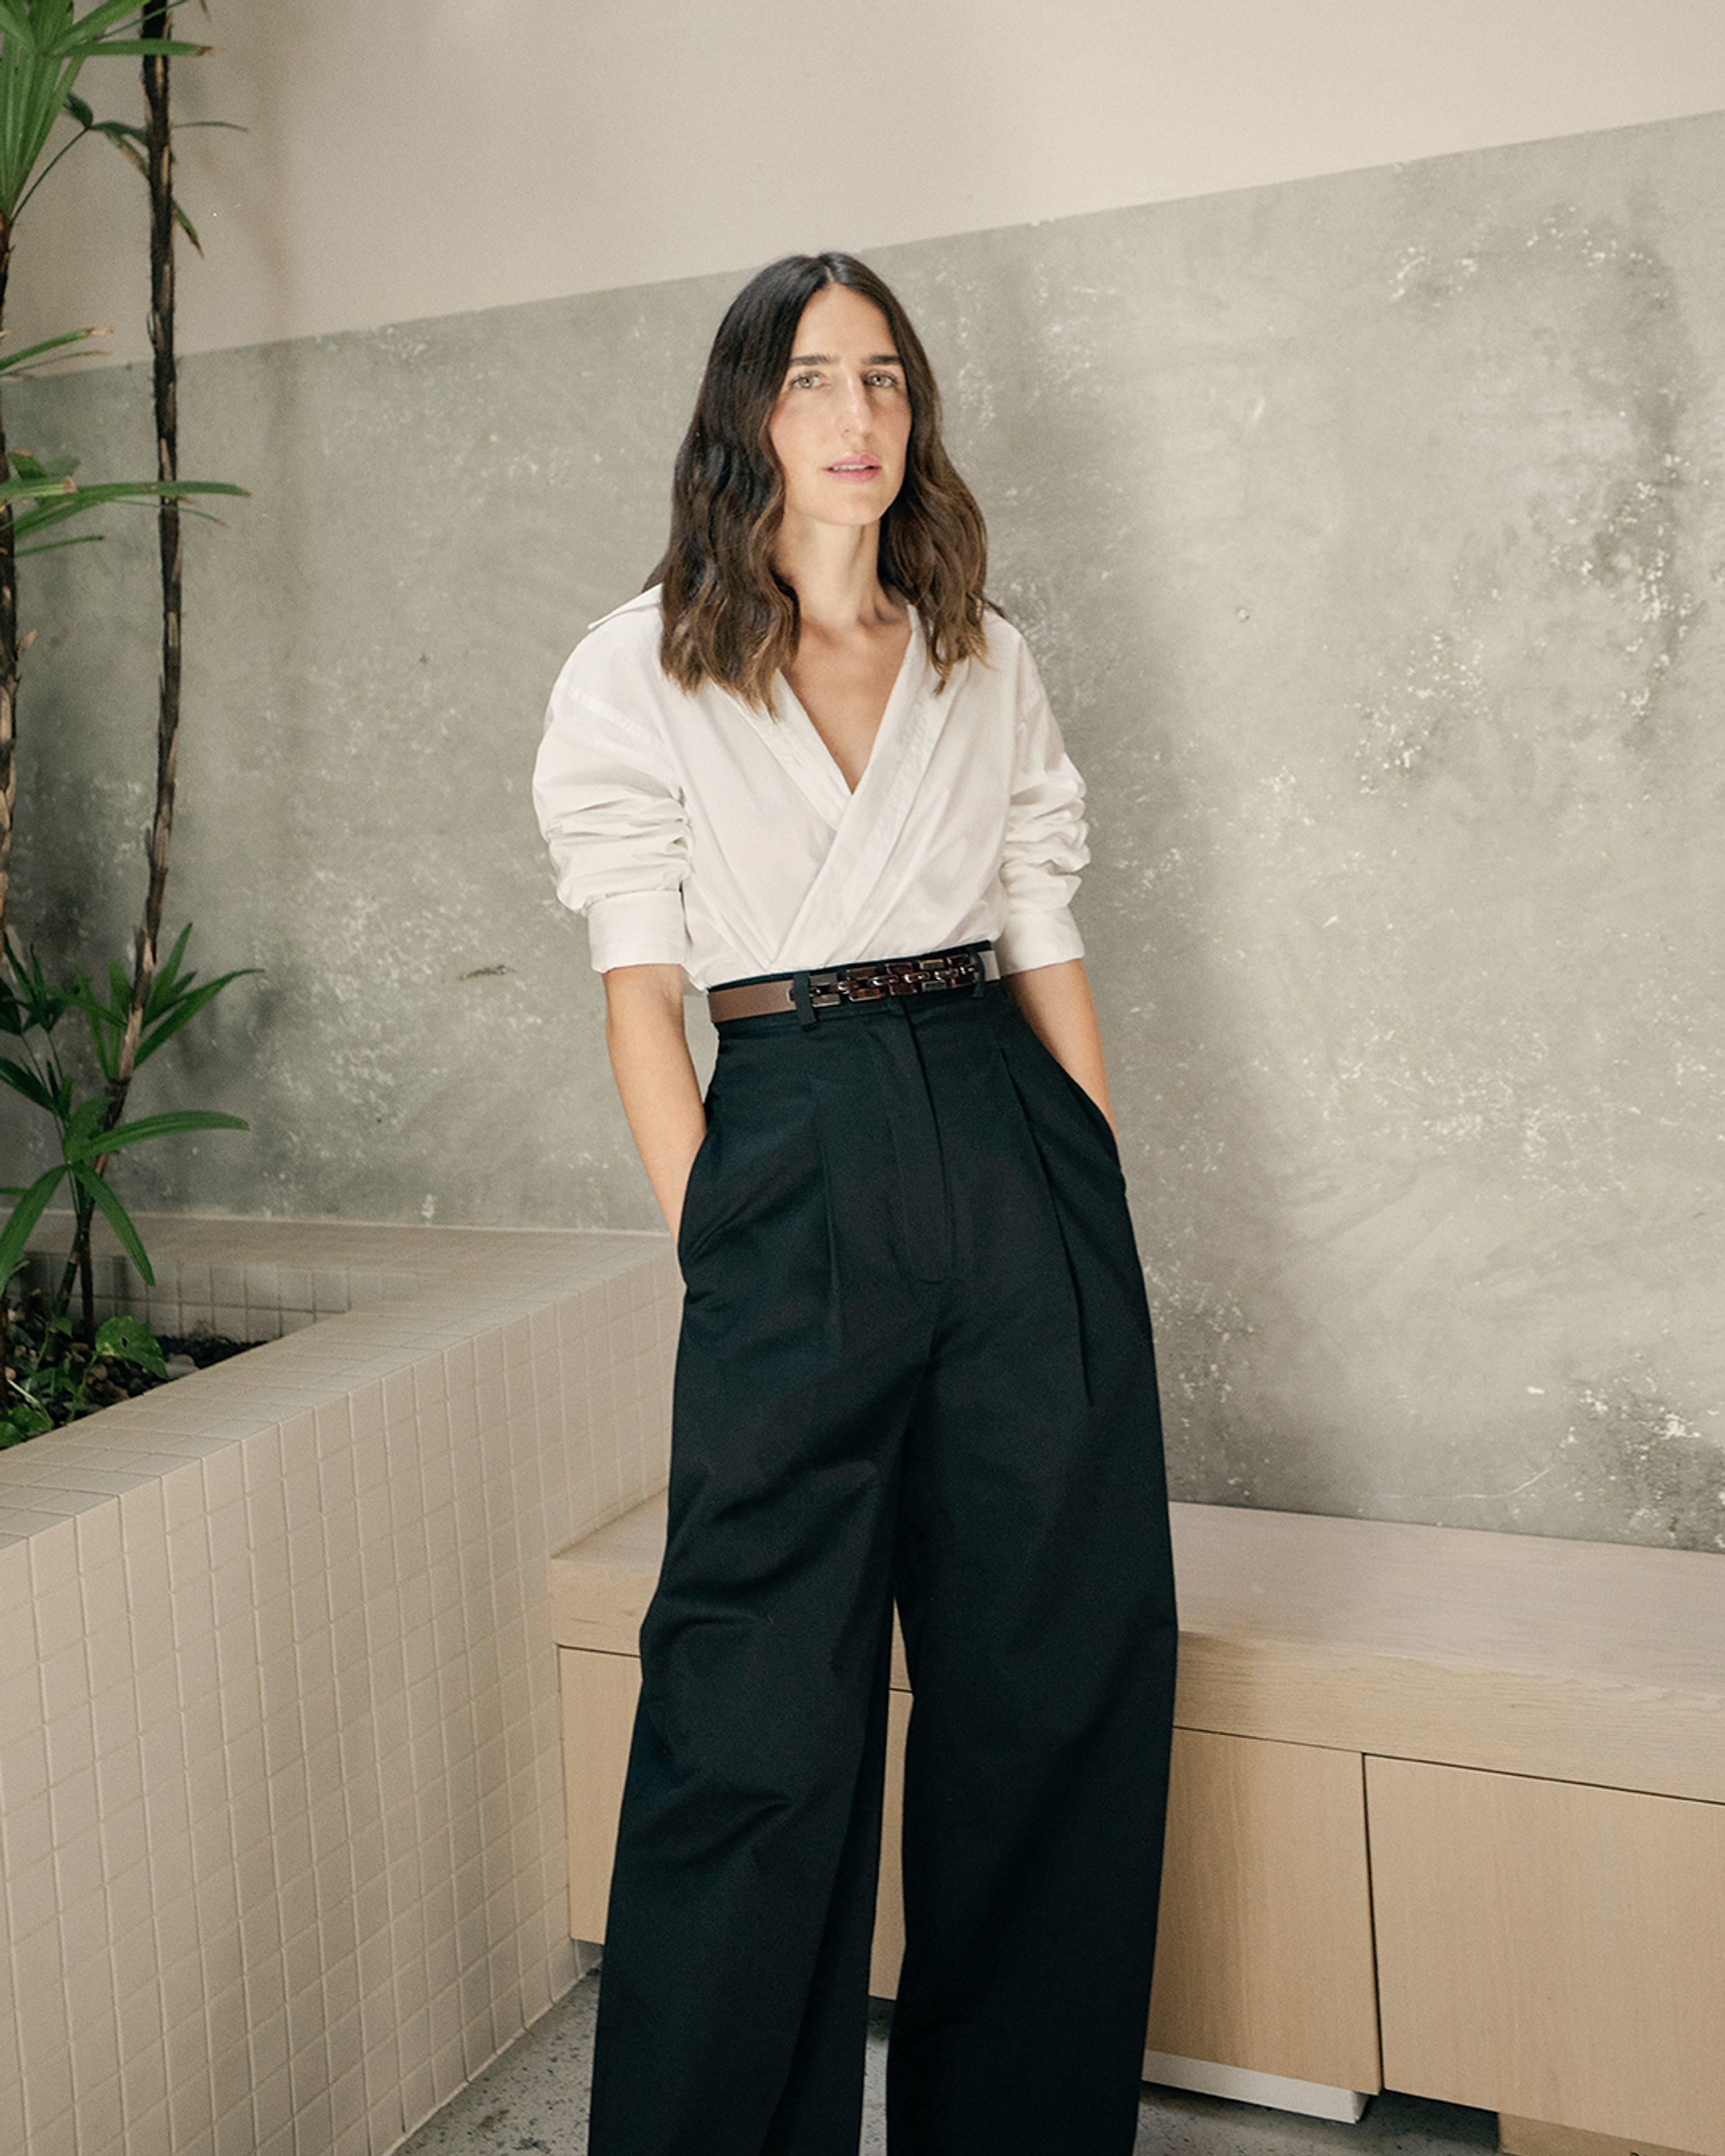 Bianca Marchi posing front on in a white shirt and black wide leg trousers with hands in pockets